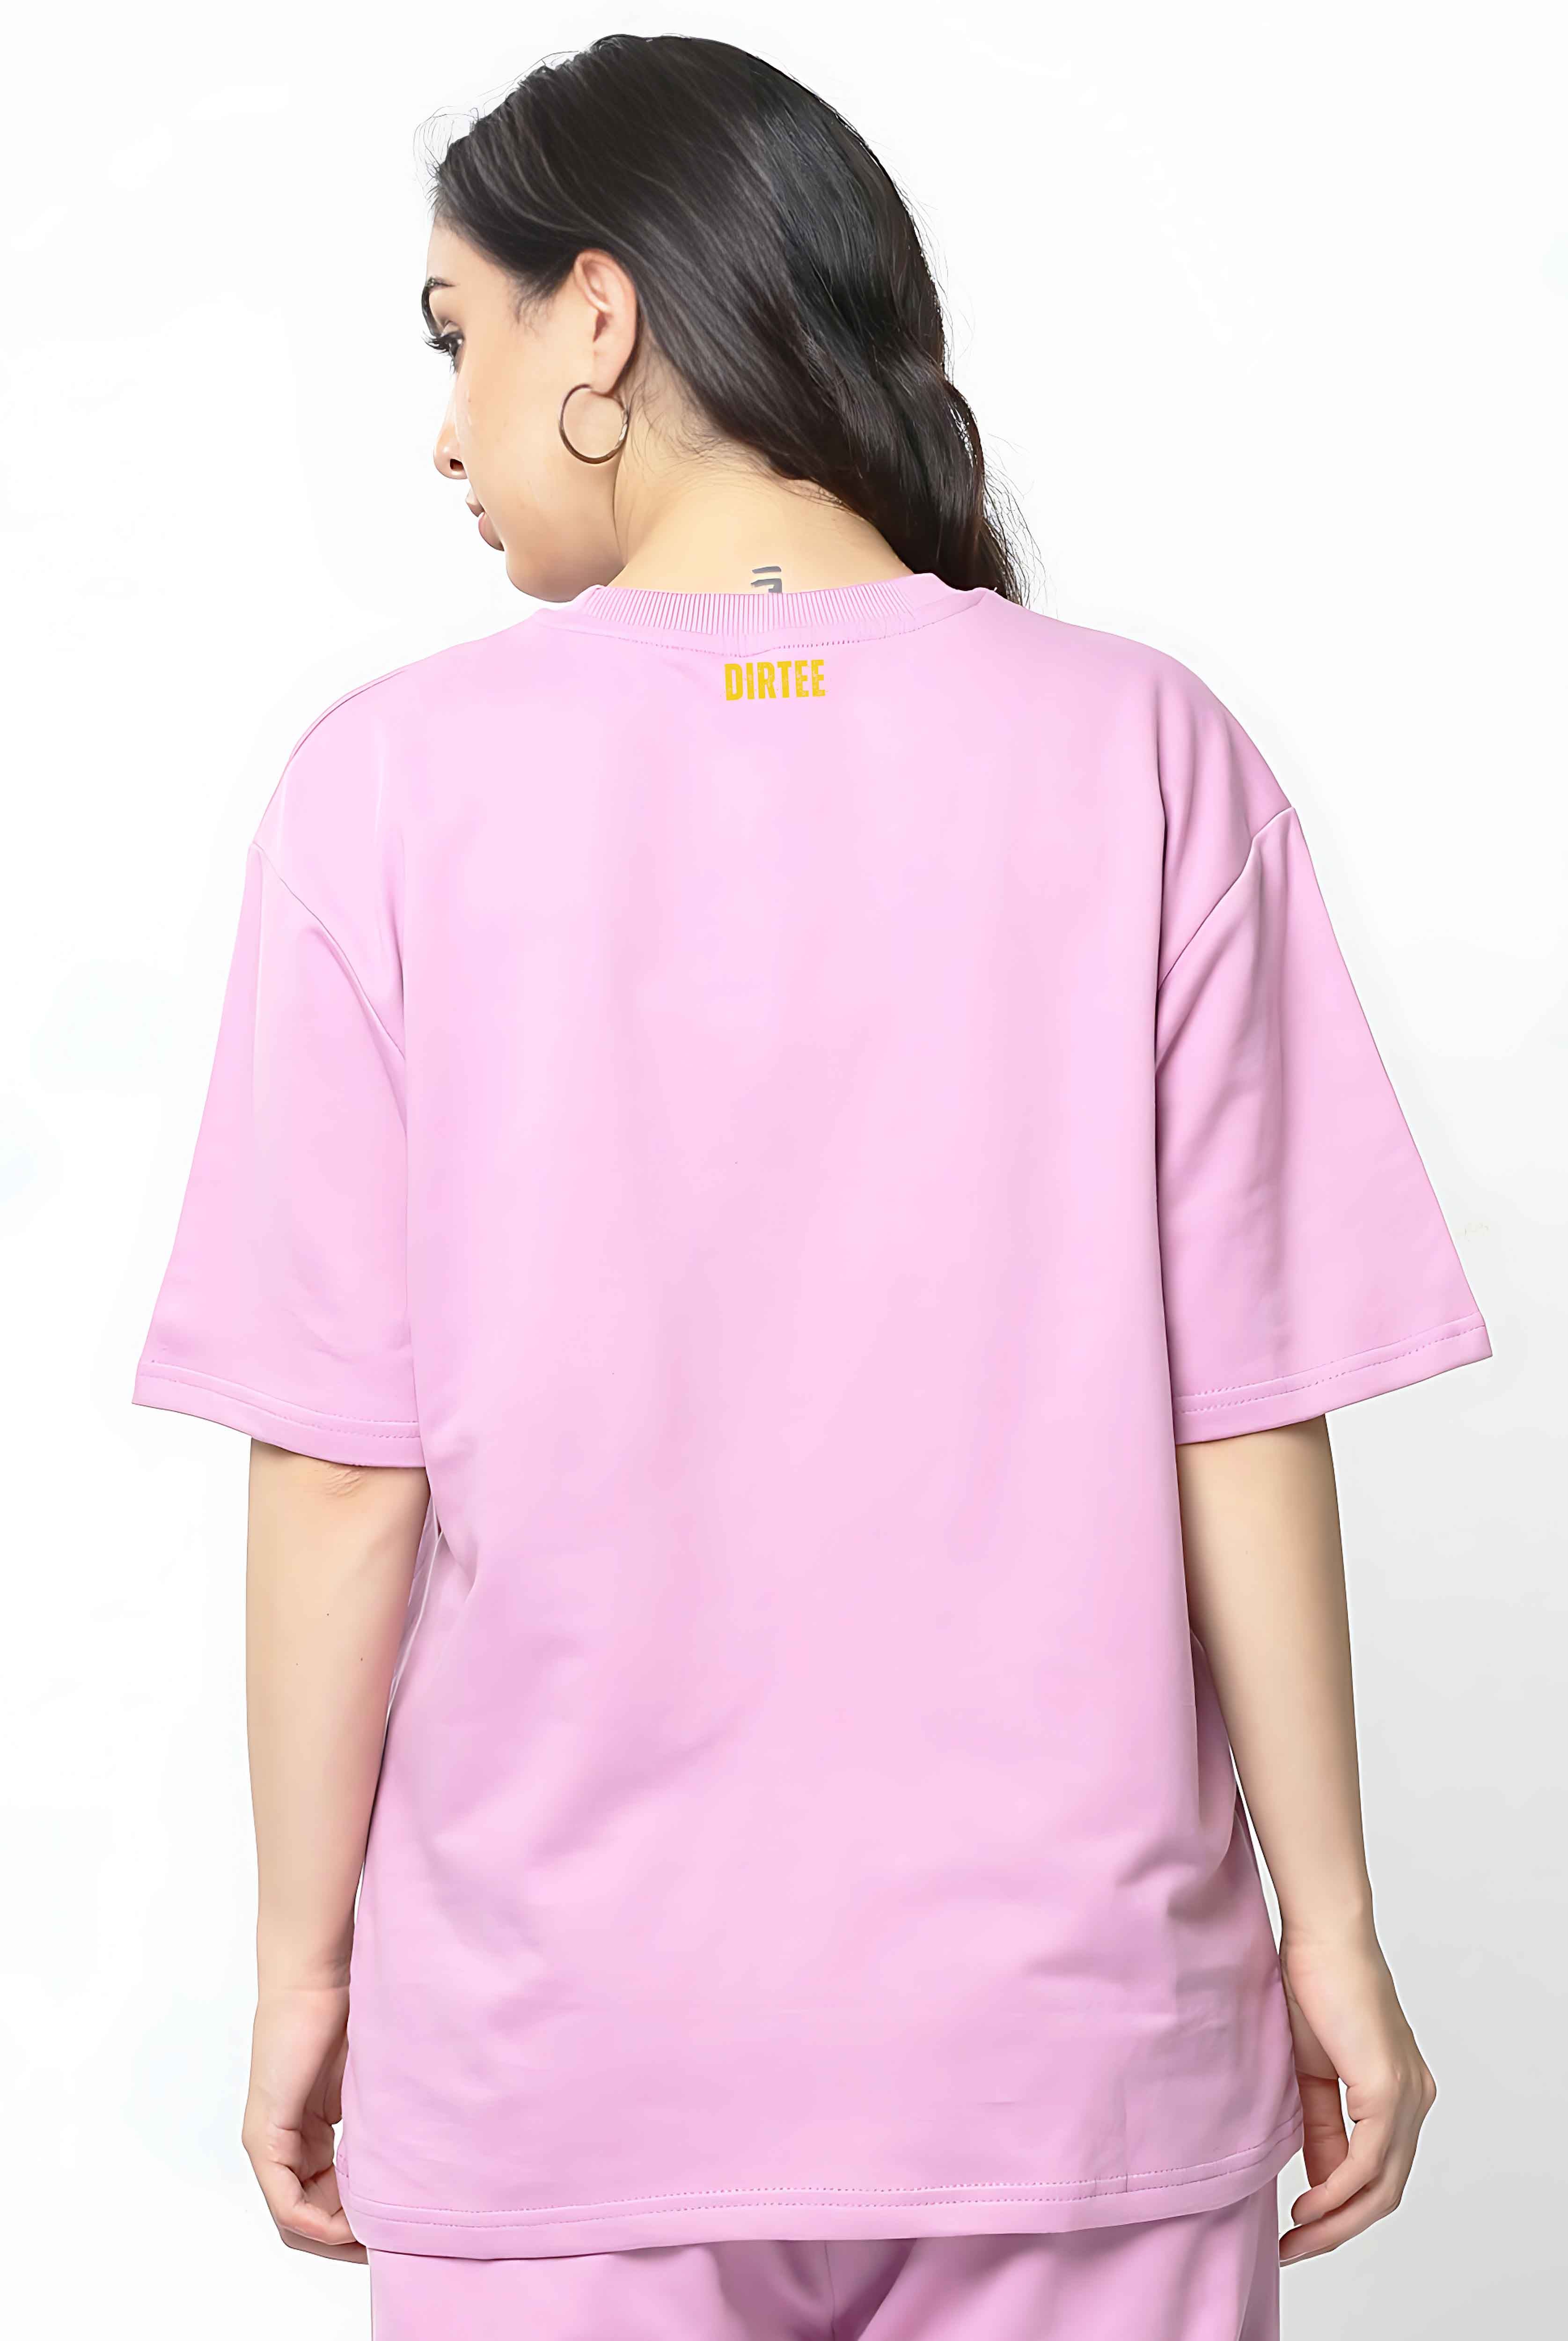 Are You Women's Lavender Oversized T-Shirt